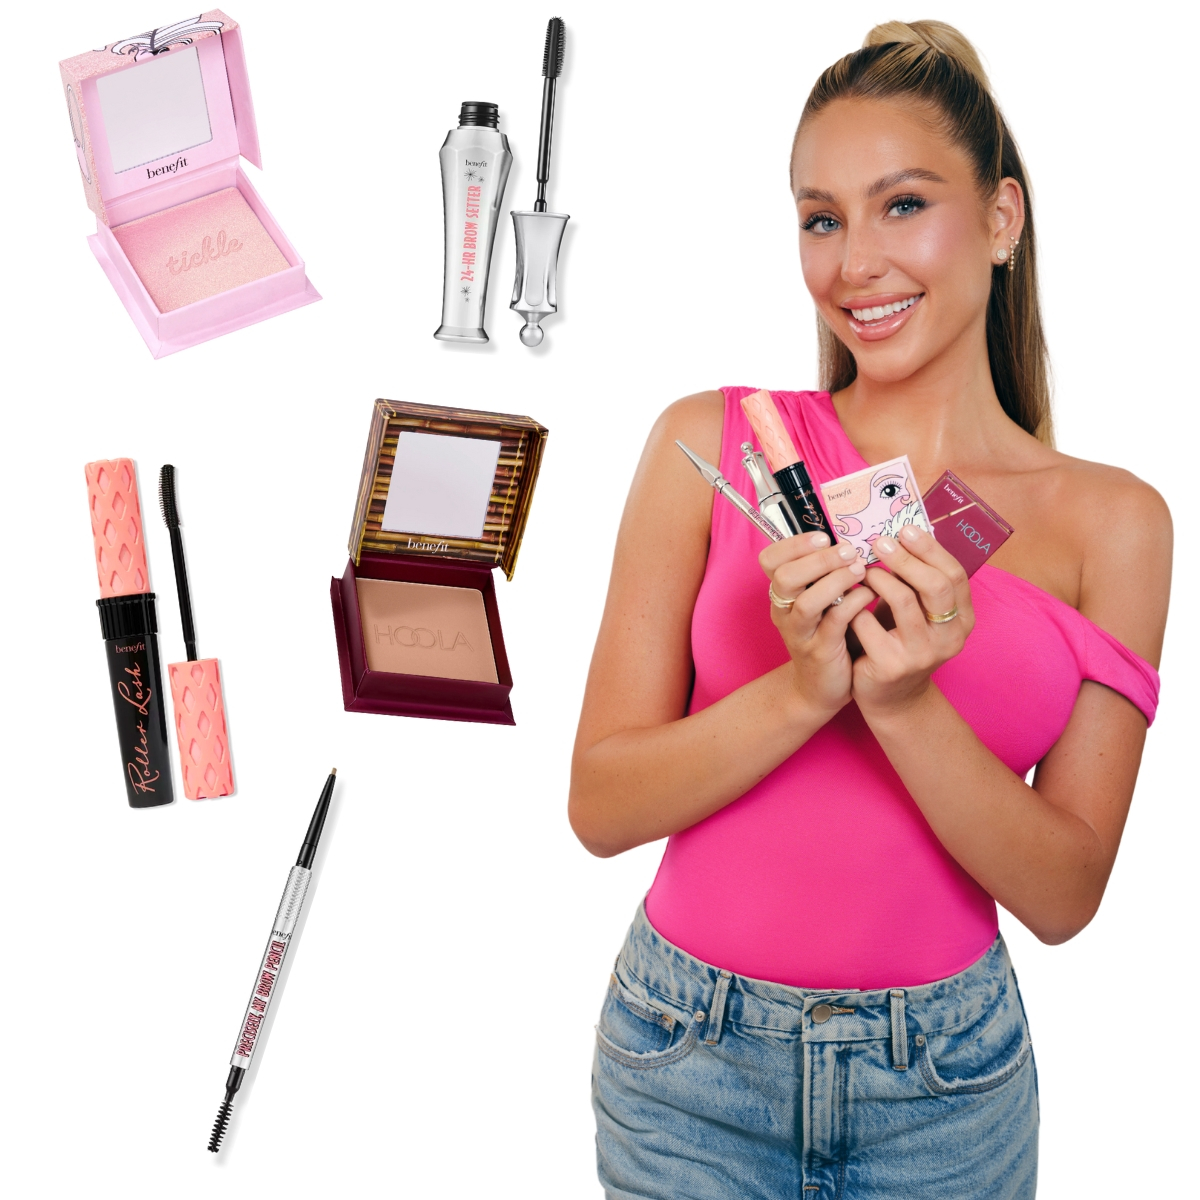 Get Ready With Alix Earle's Makeup Must-Haves